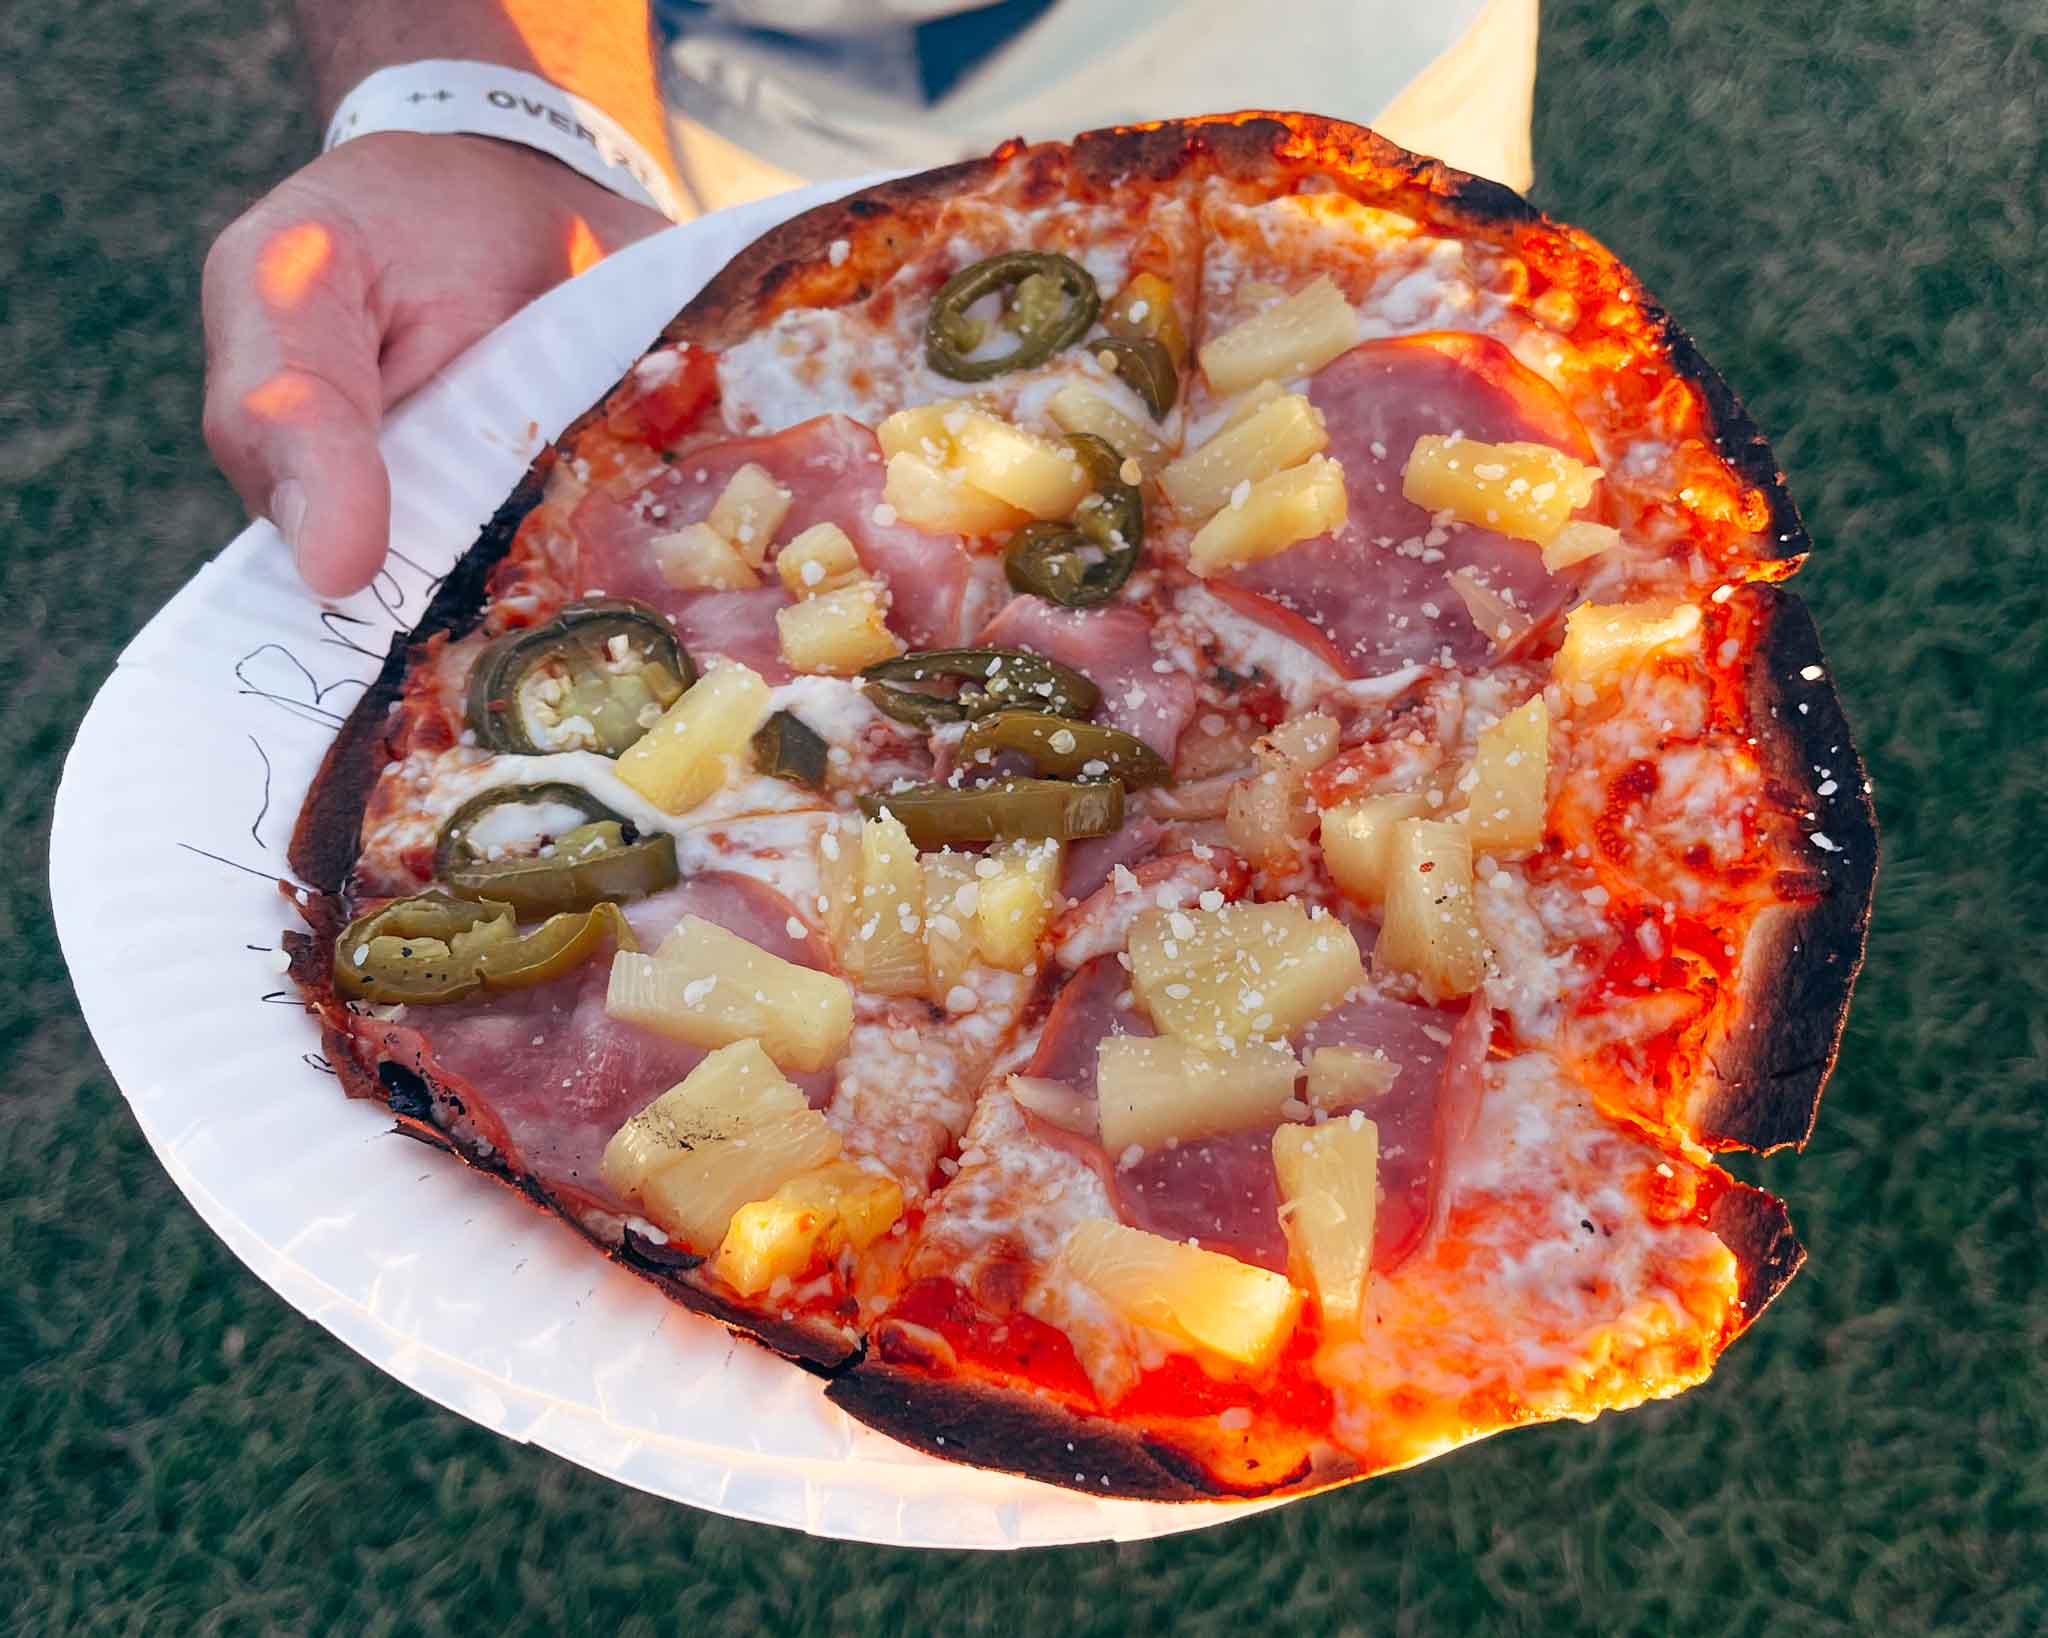 Hand holds a plate of pizza with jalapenos and pineapple at Bend concerts